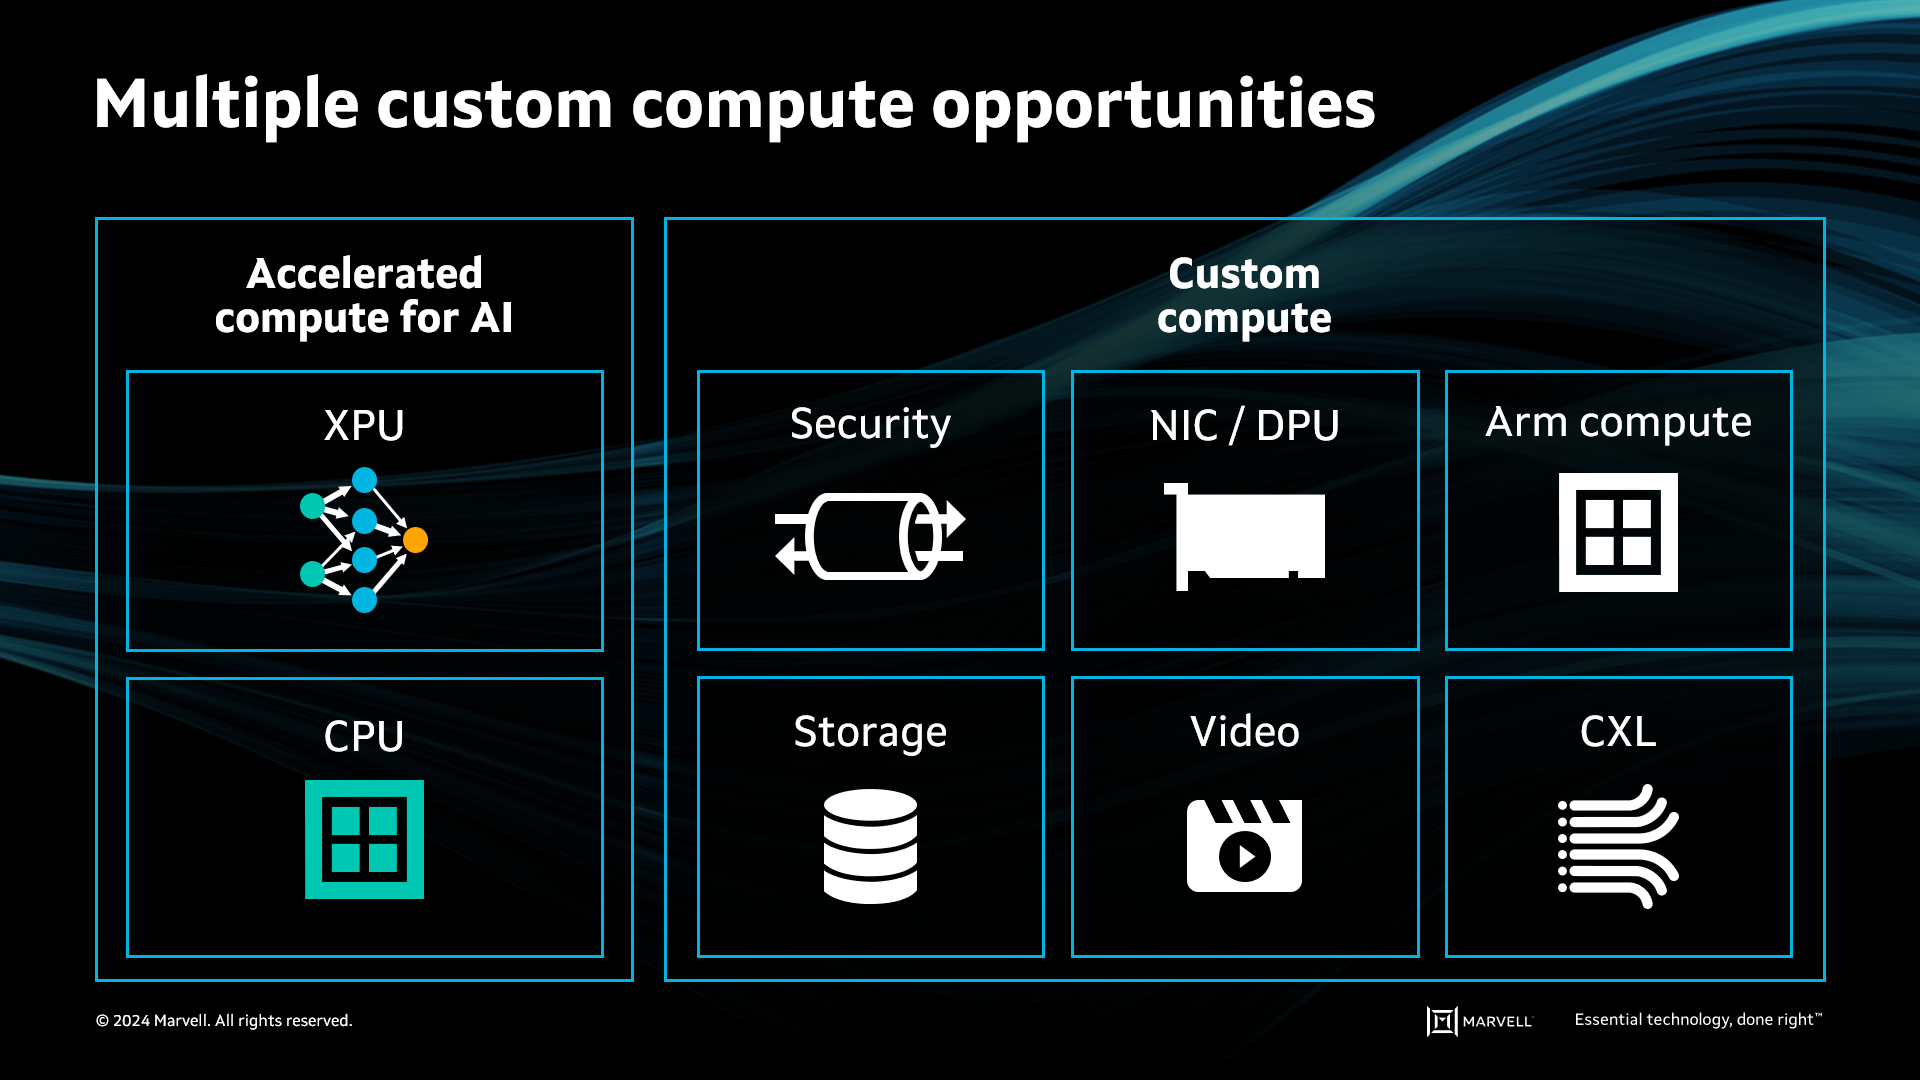 Custom compute opportunities span numerous applications, companies, and generations